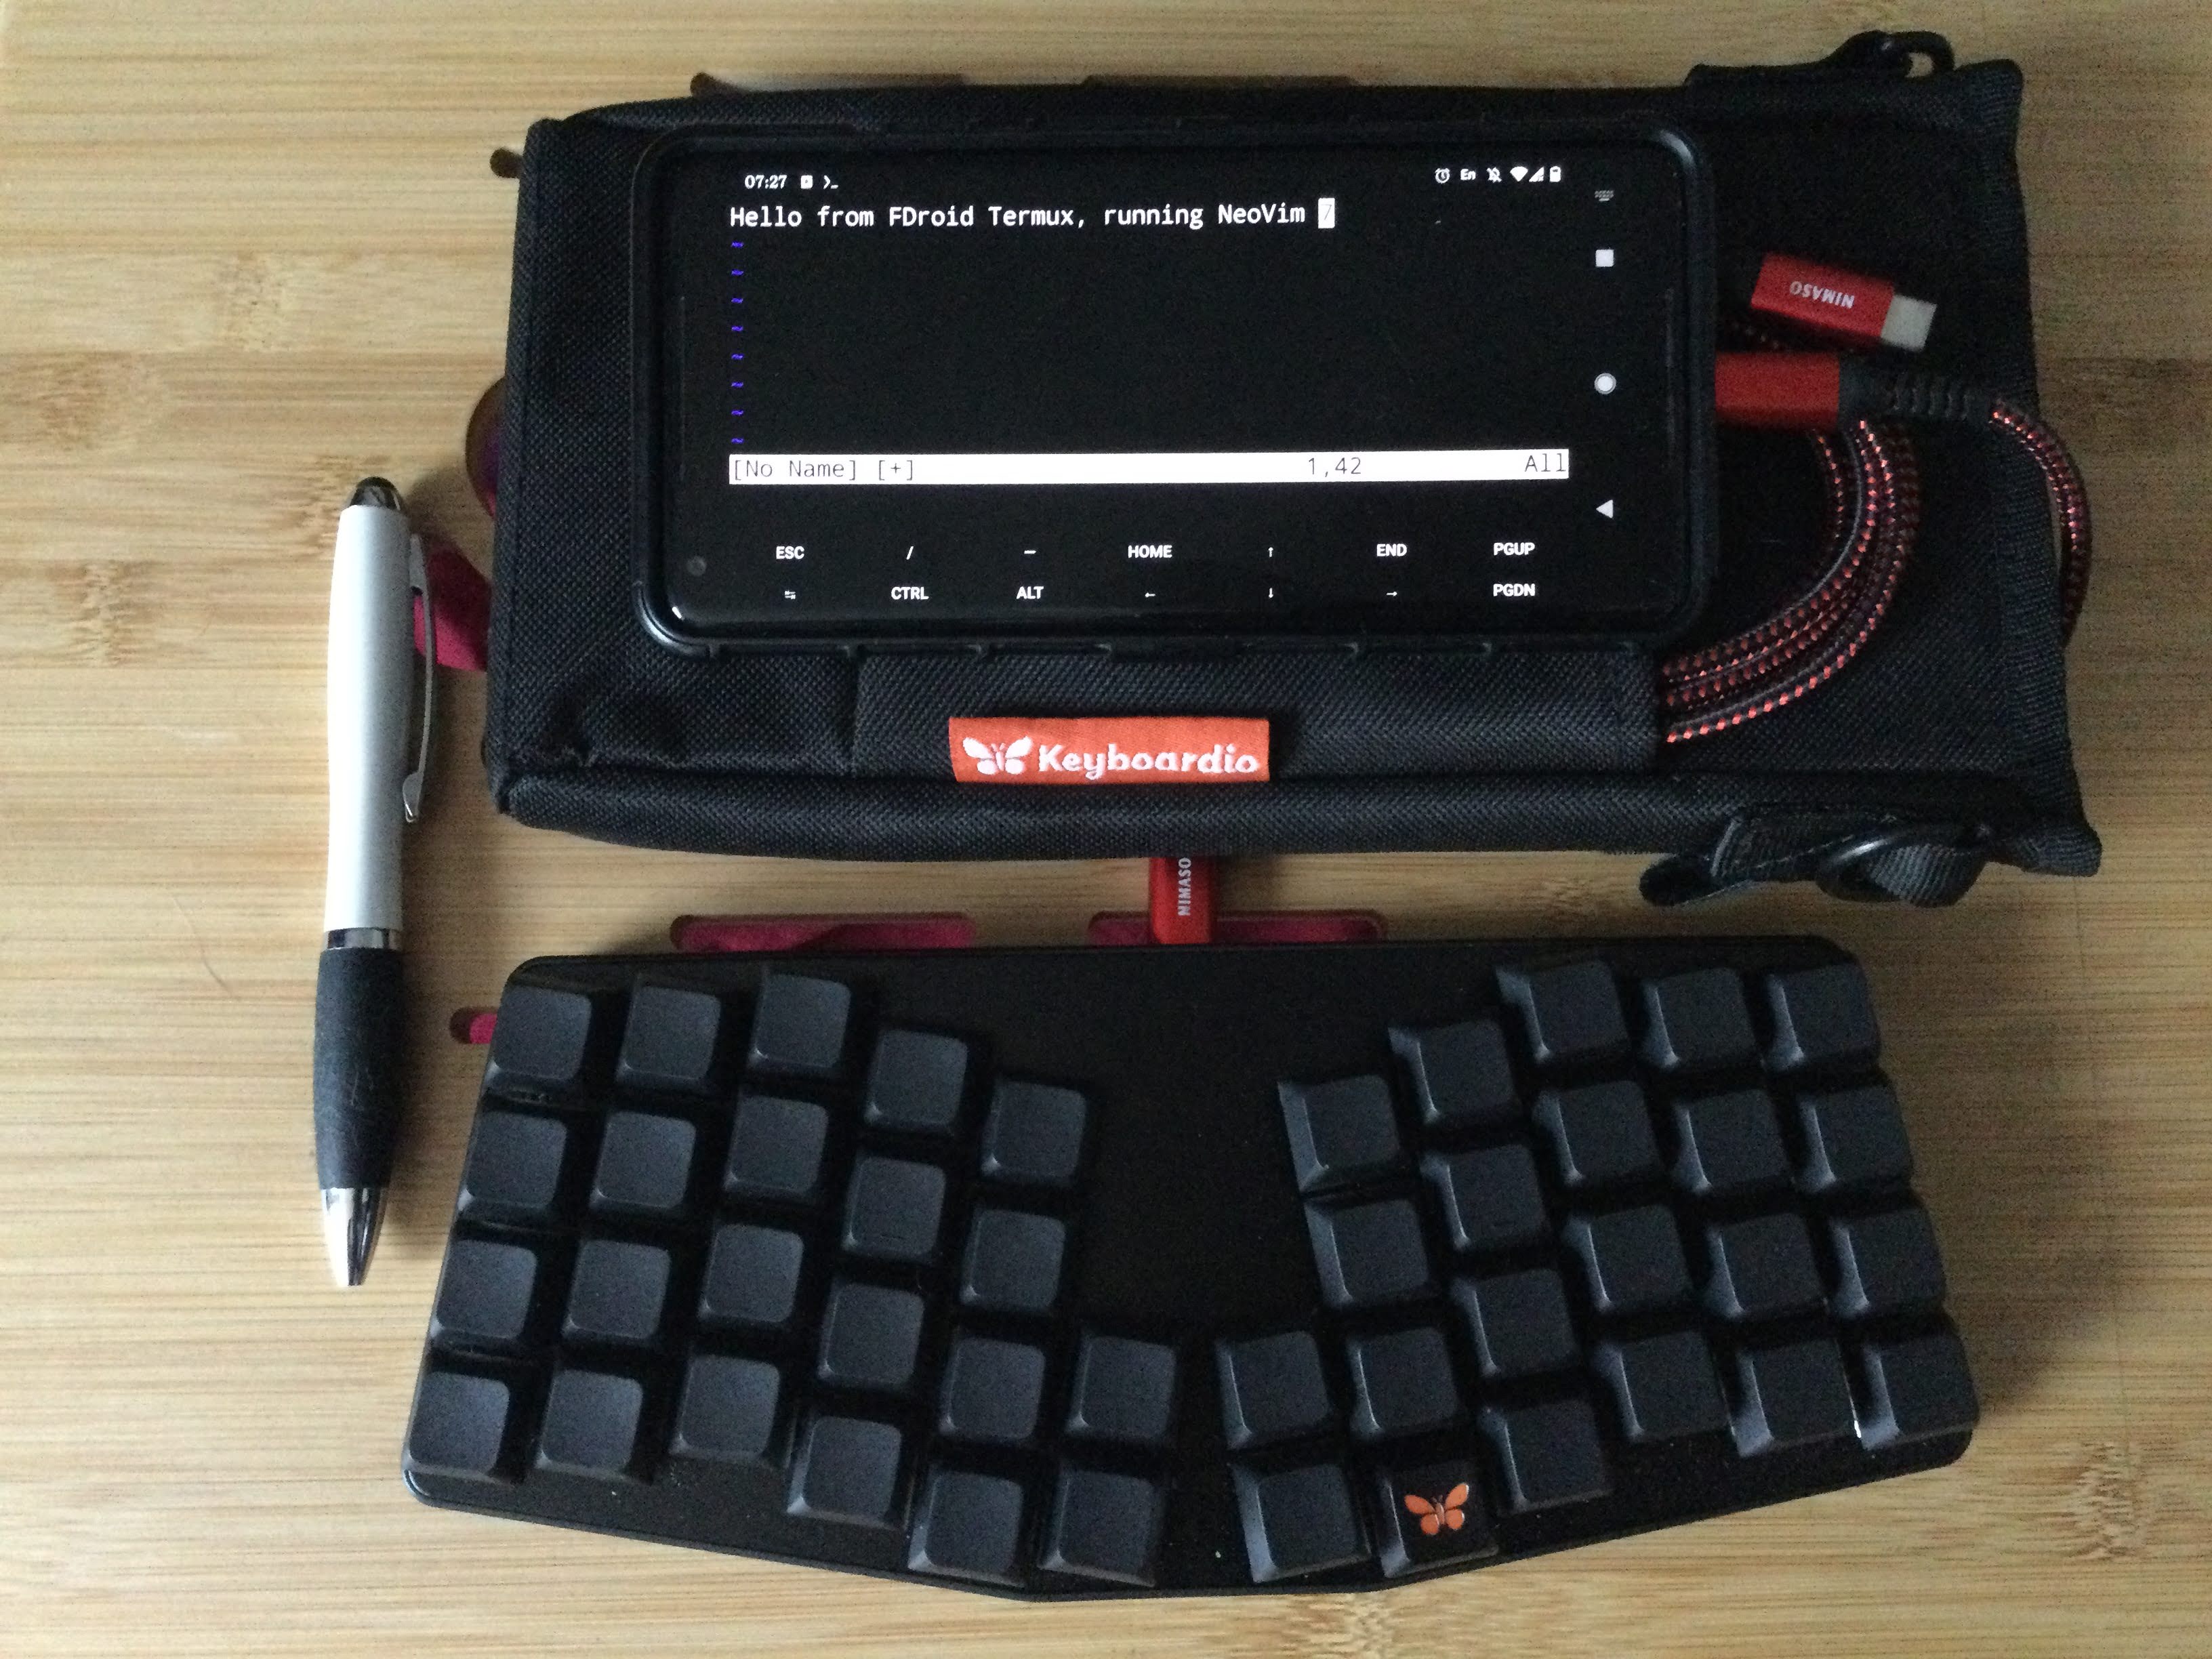 Ultra-mobile development environment - android with Termux and Keyboardio Atreus keyboard